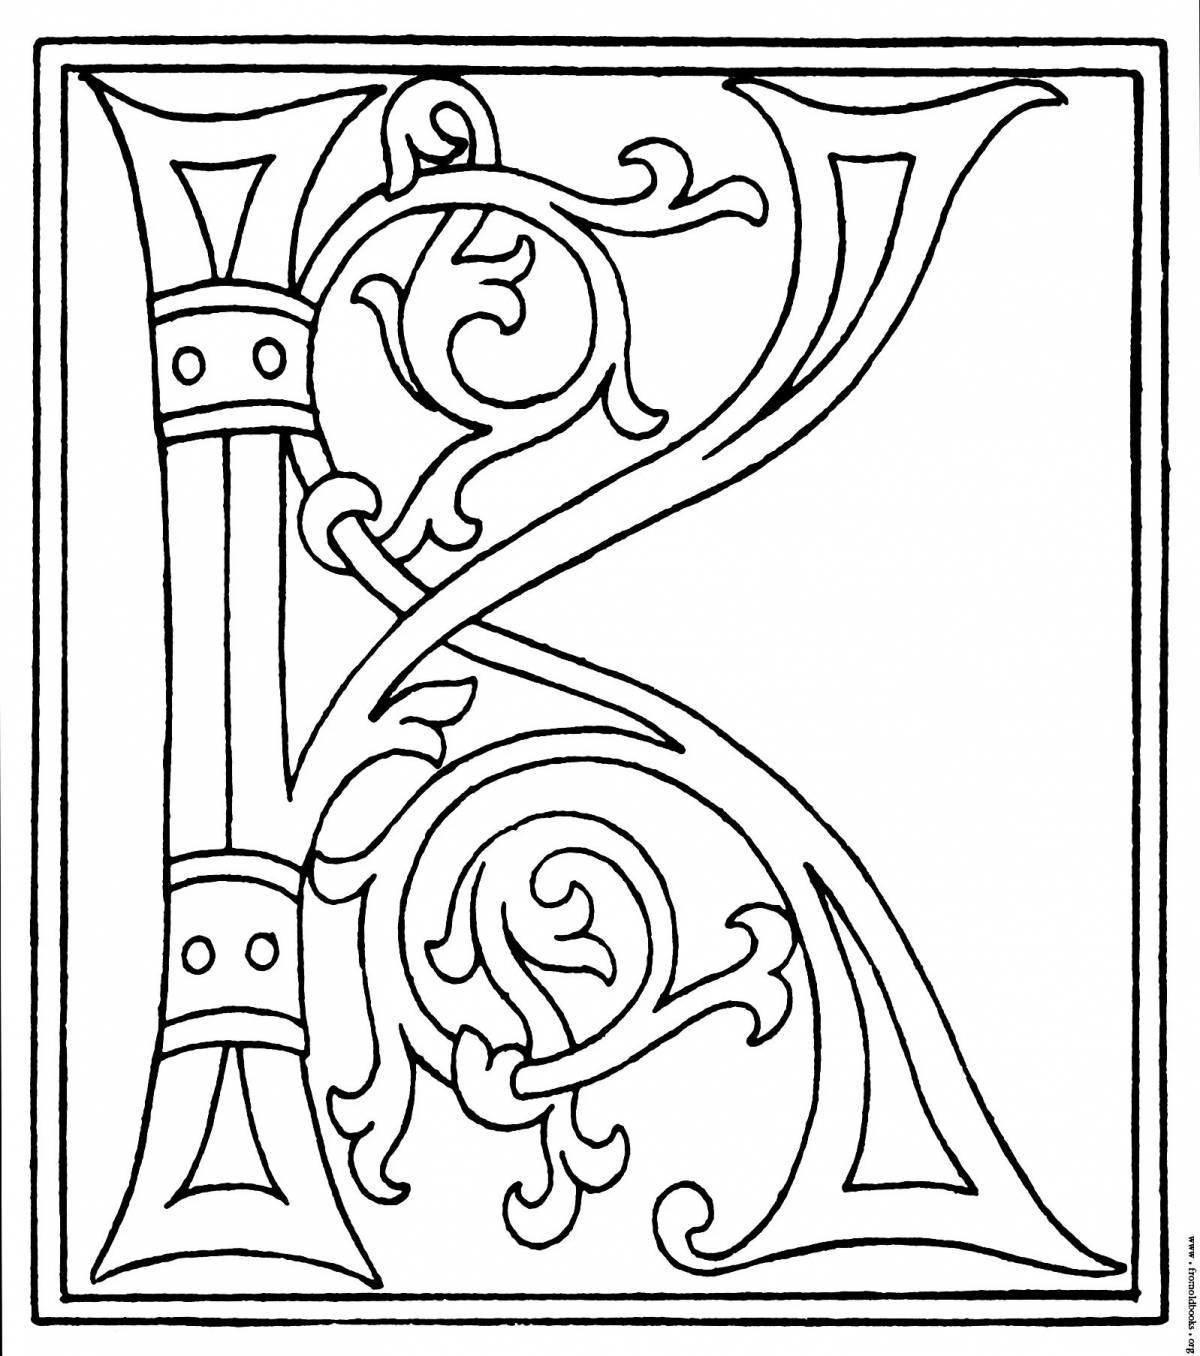 Fun coloring page initial letter